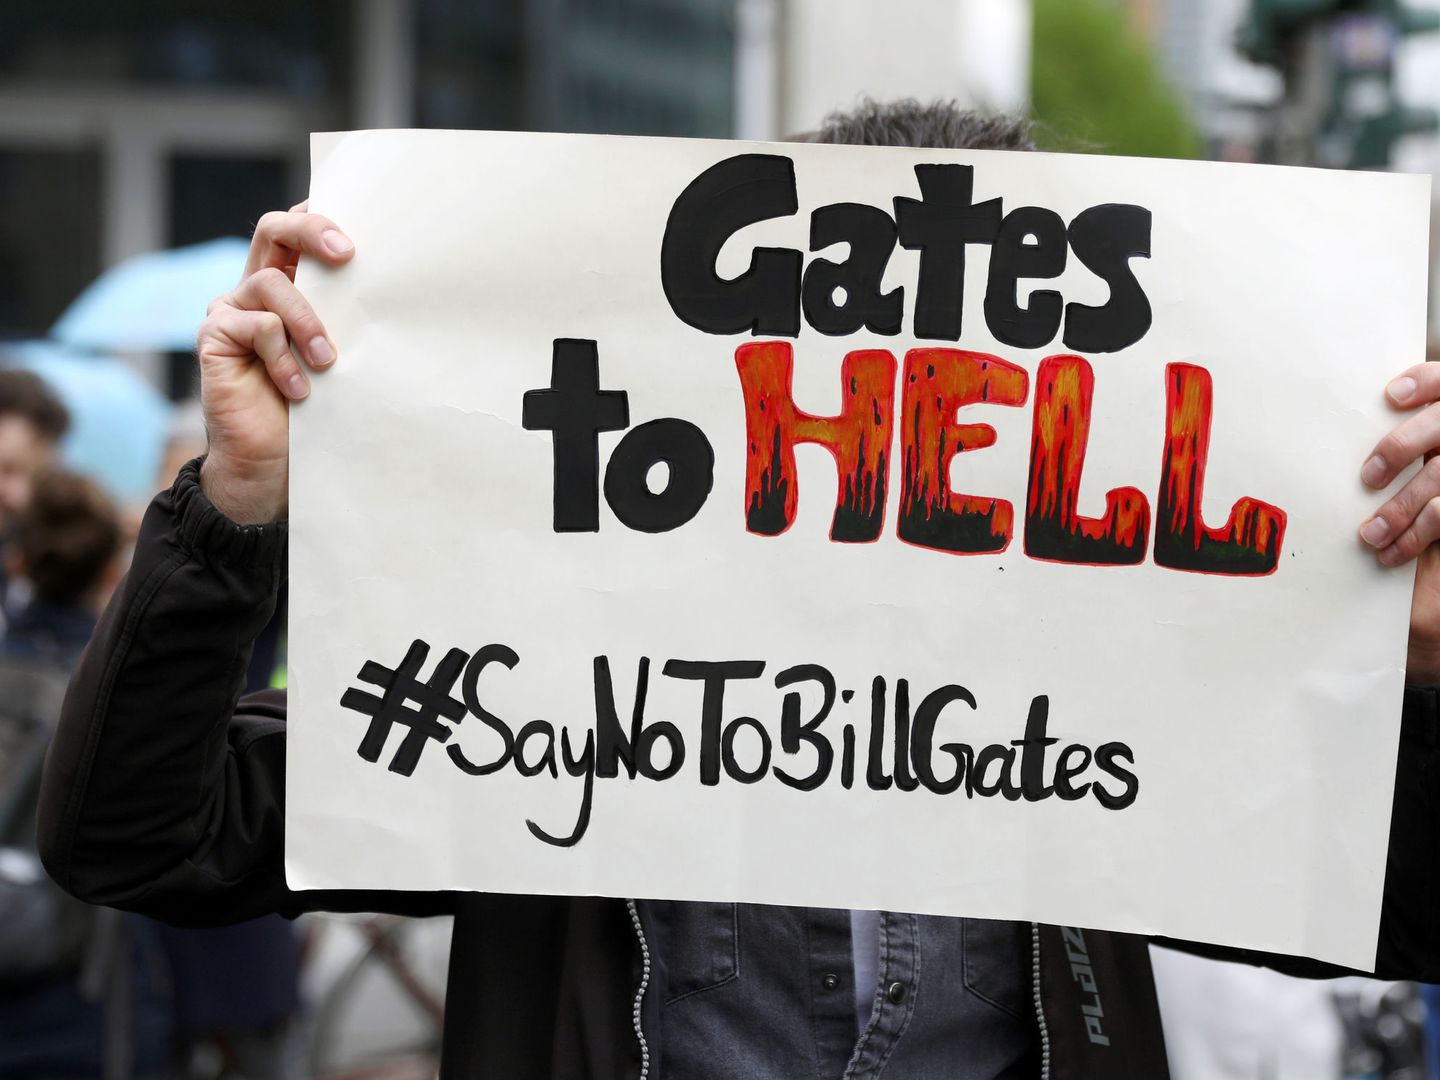 A protester holds up a placard with a message against Bill Gates, during a demonstration against the lockdown imposed to slow down the spread of the coronavirus disease (COVID-19), in Berlin, Germany April 25, 2020. REUTERS Christian Mang